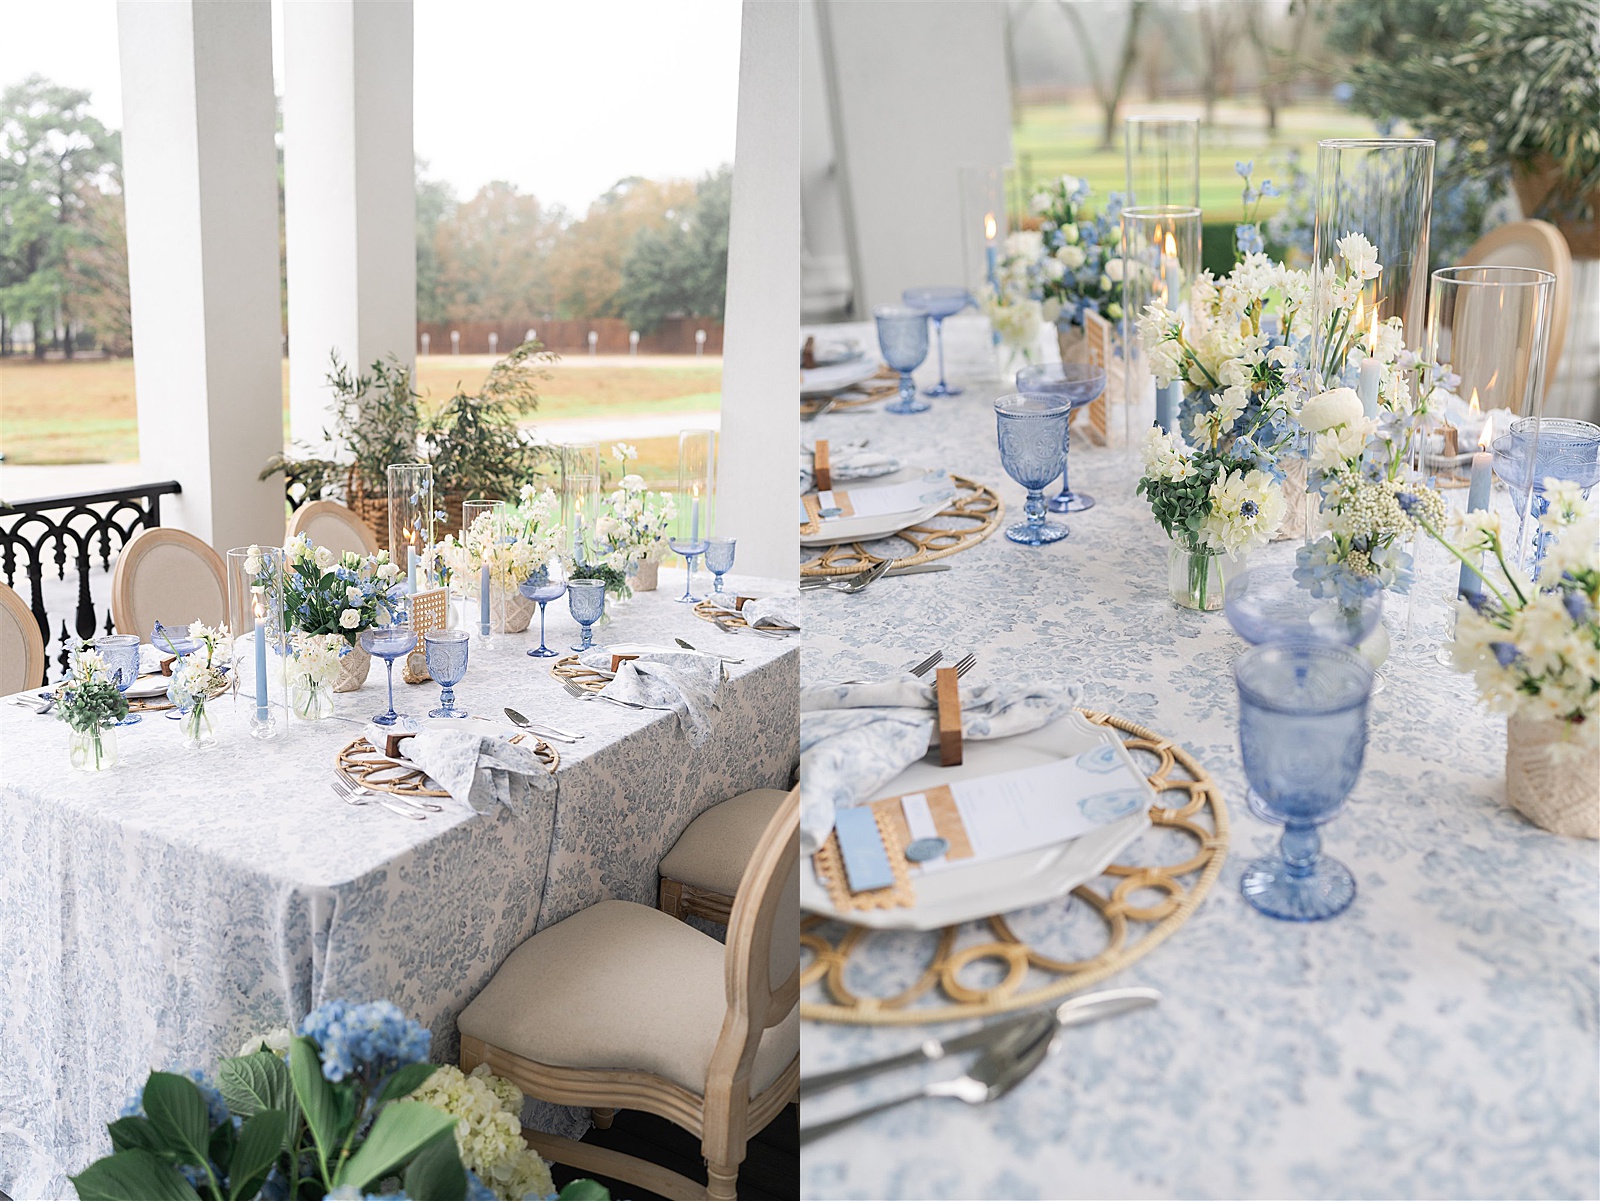 Stunning table settings by Houston’s Best Wedding Photographers